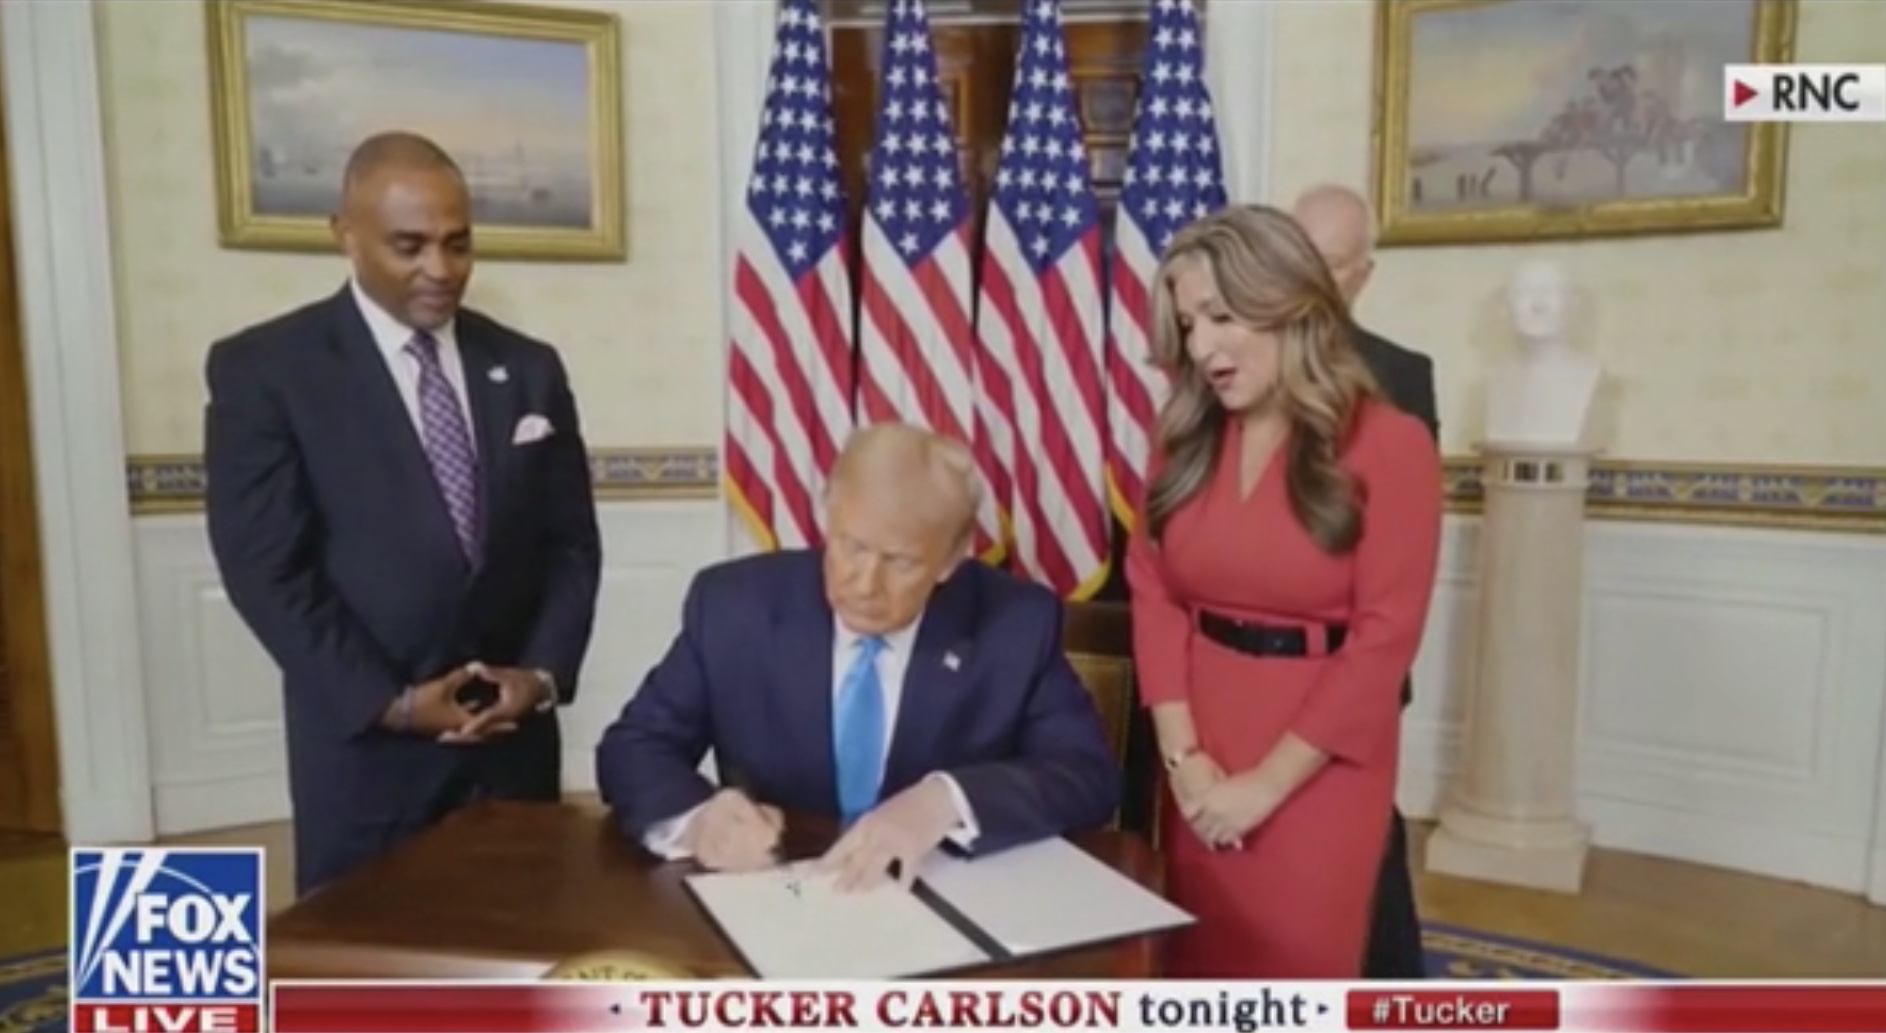 Hope for Prisoners founder Jon Ponder (R) watches as President Donald Trump signs a Presidential Pardon for him during the Republican National Convention on “Tucker Carlson Live,” Aug. 25, 2020. Fox News screenshot